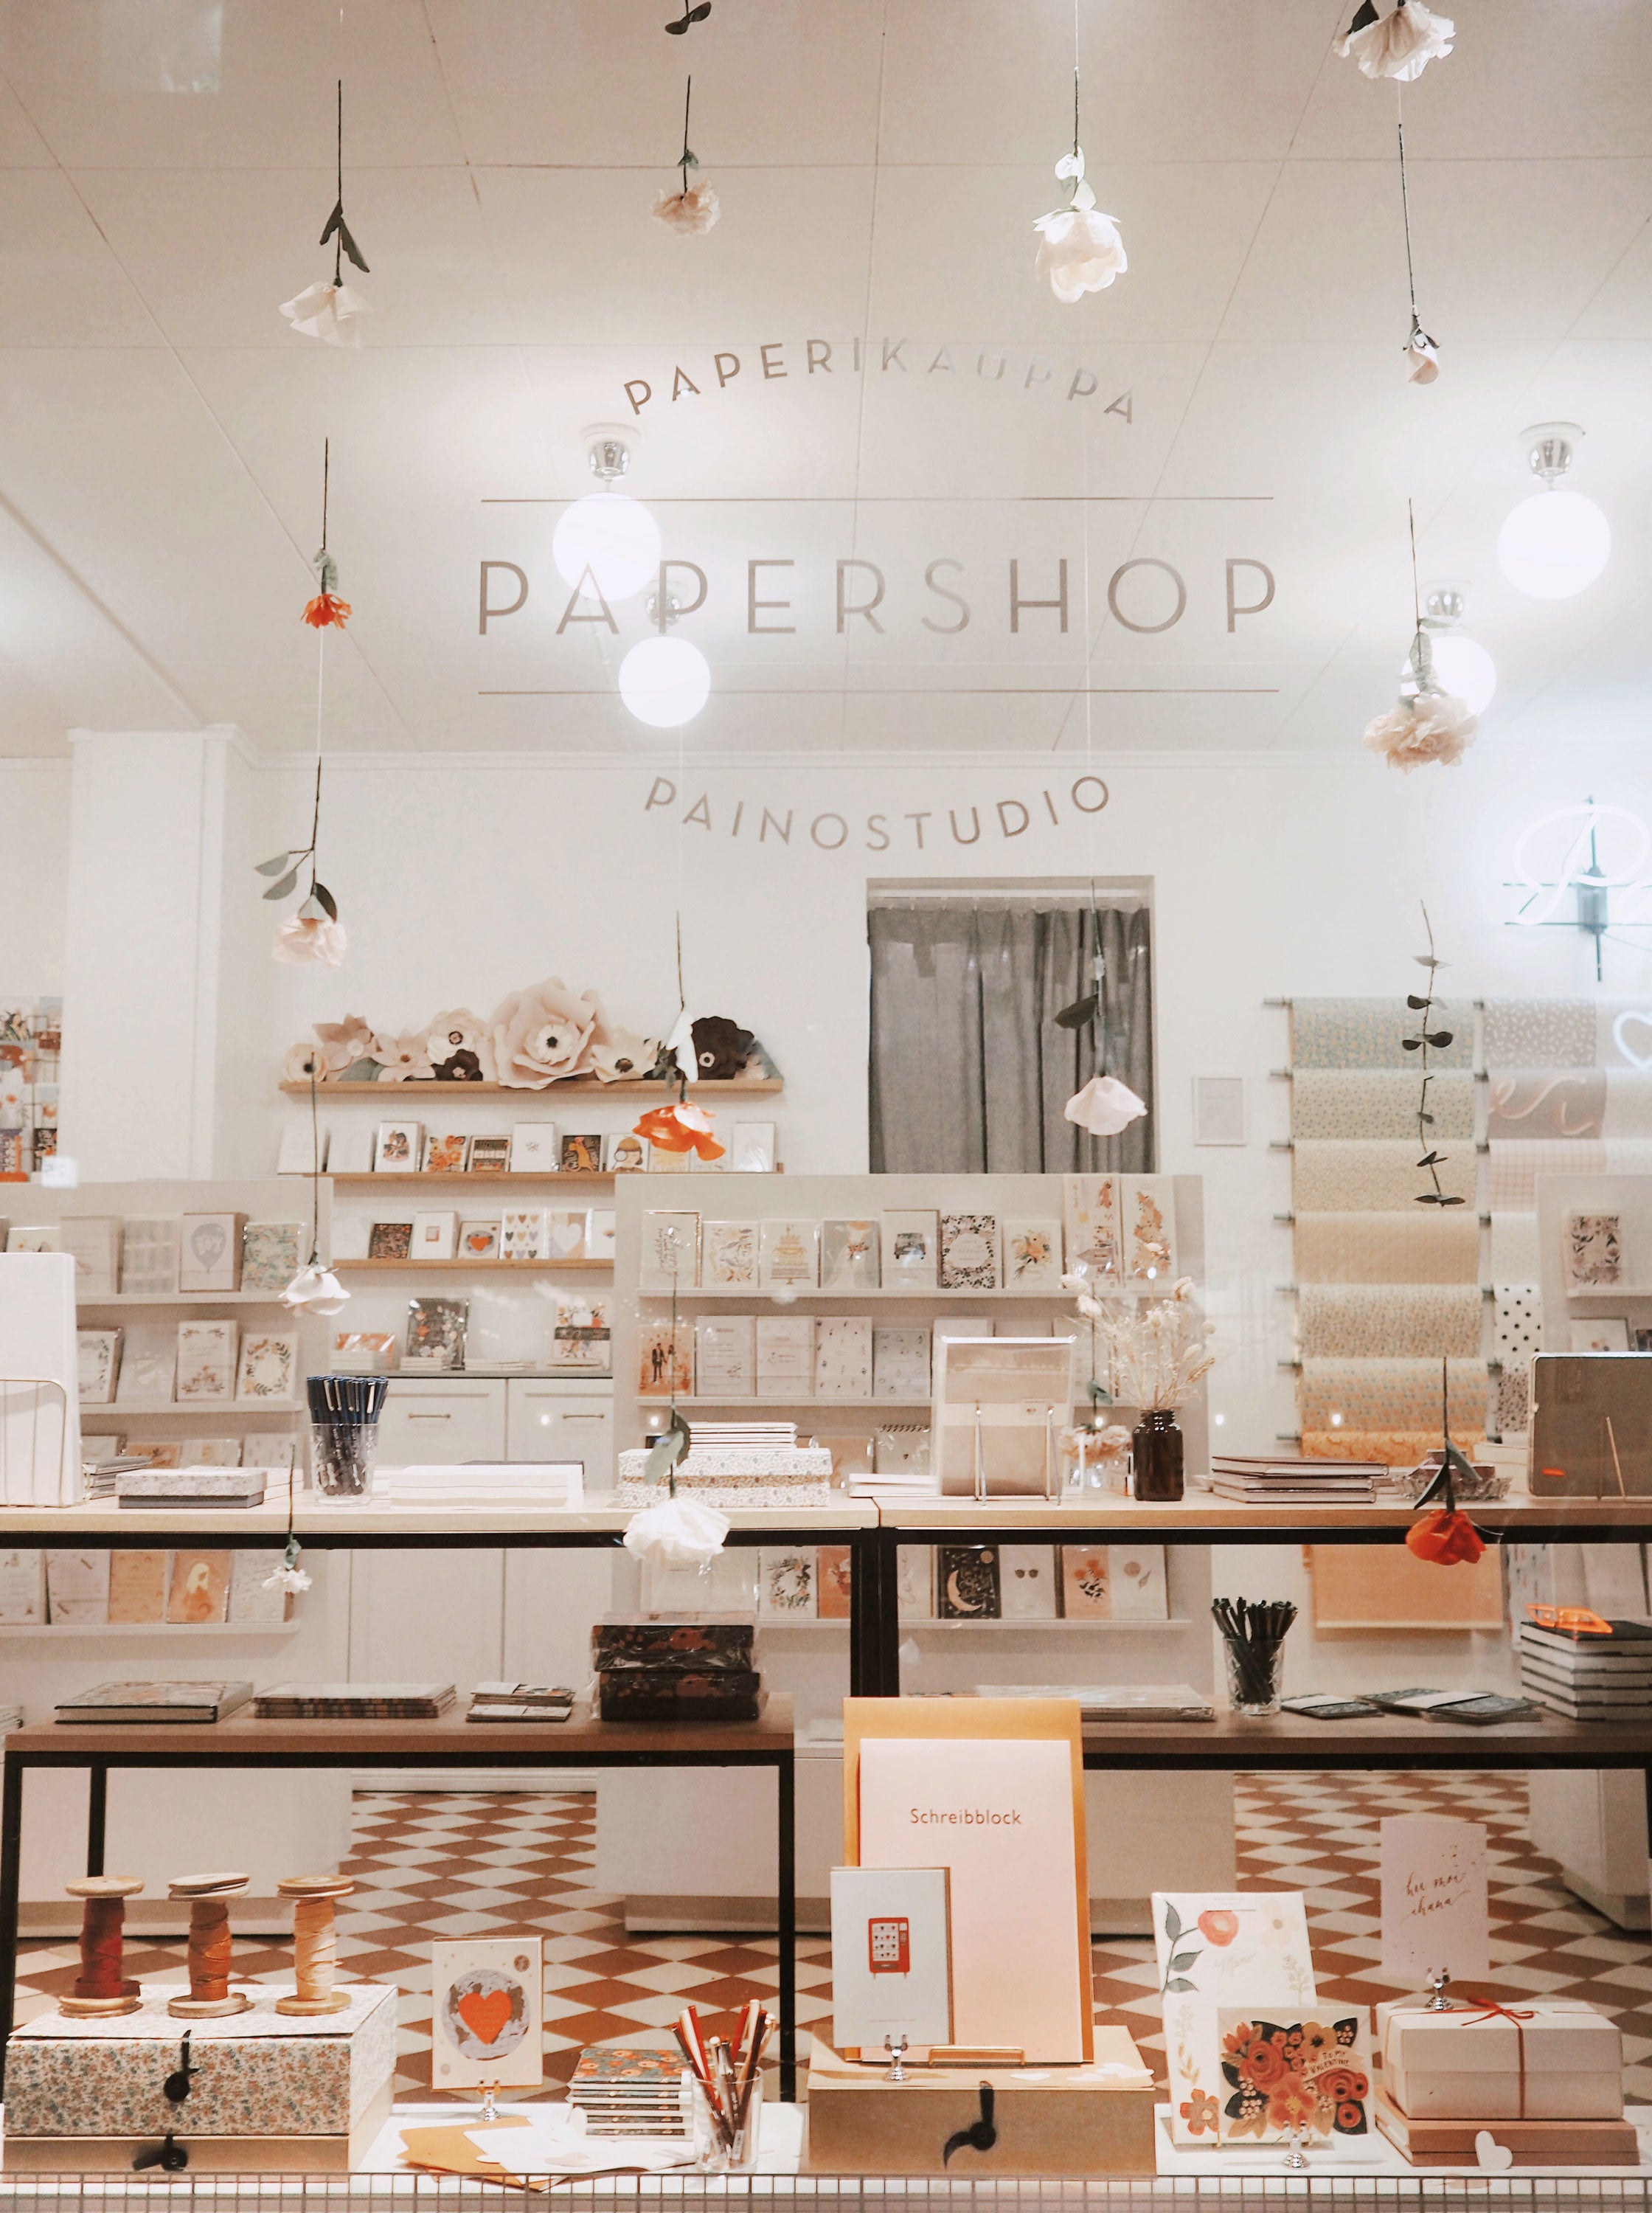 Beautiful Papershop Helsinki is located in the heart of Helsinki, Finland. From my experience, they have a unique approach to the stationery world and I’m free to say their style is very selective but refined. The brands and products they chose are of great quality and not something you can usually see in the big-box stores.